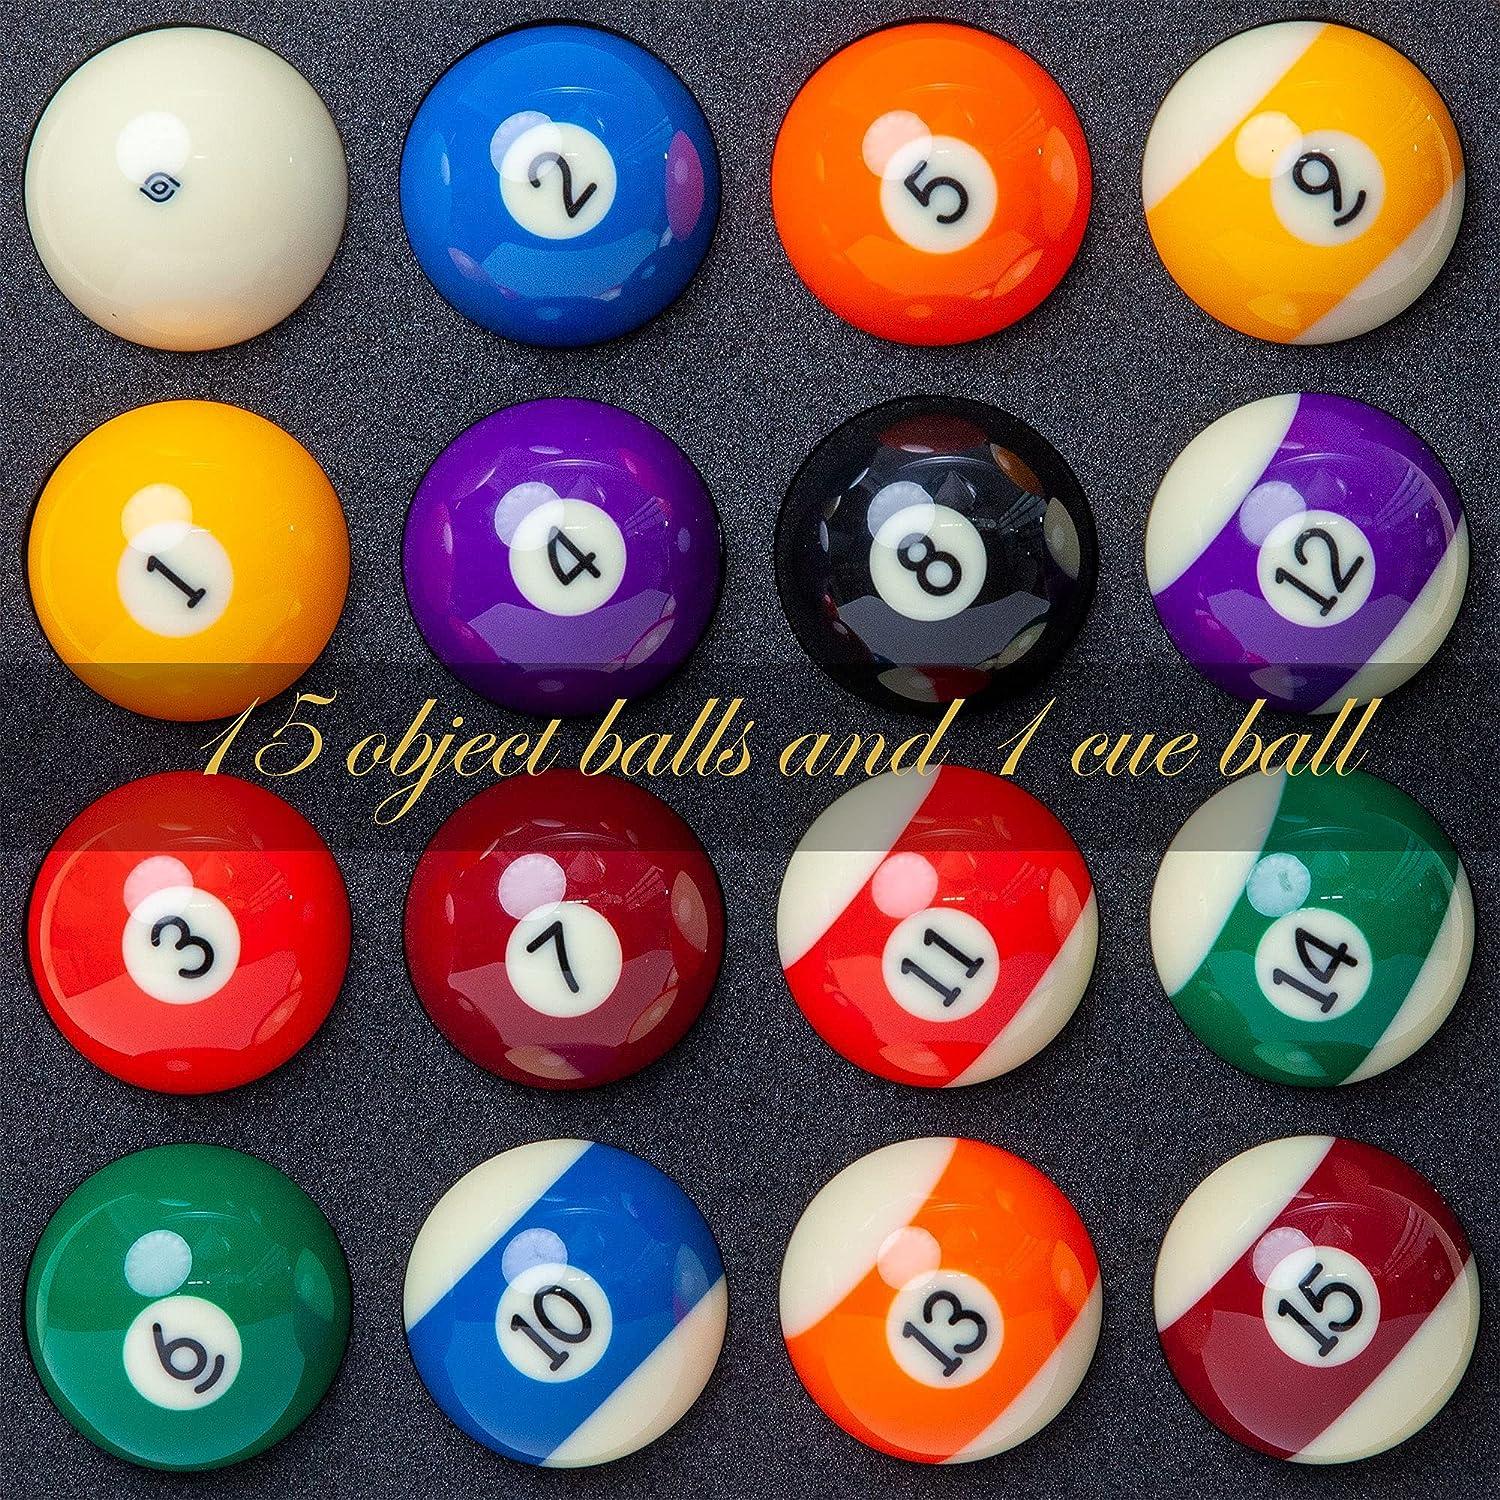  Younghemani Regulation Size Pool Balls Billiard Set - Comes  with Professional Cue Ball and Silver Case - Play 8 Ball and 9 Ball - 17 Pcs  - Multi Colored 11x11 Inches : Sports & Outdoors